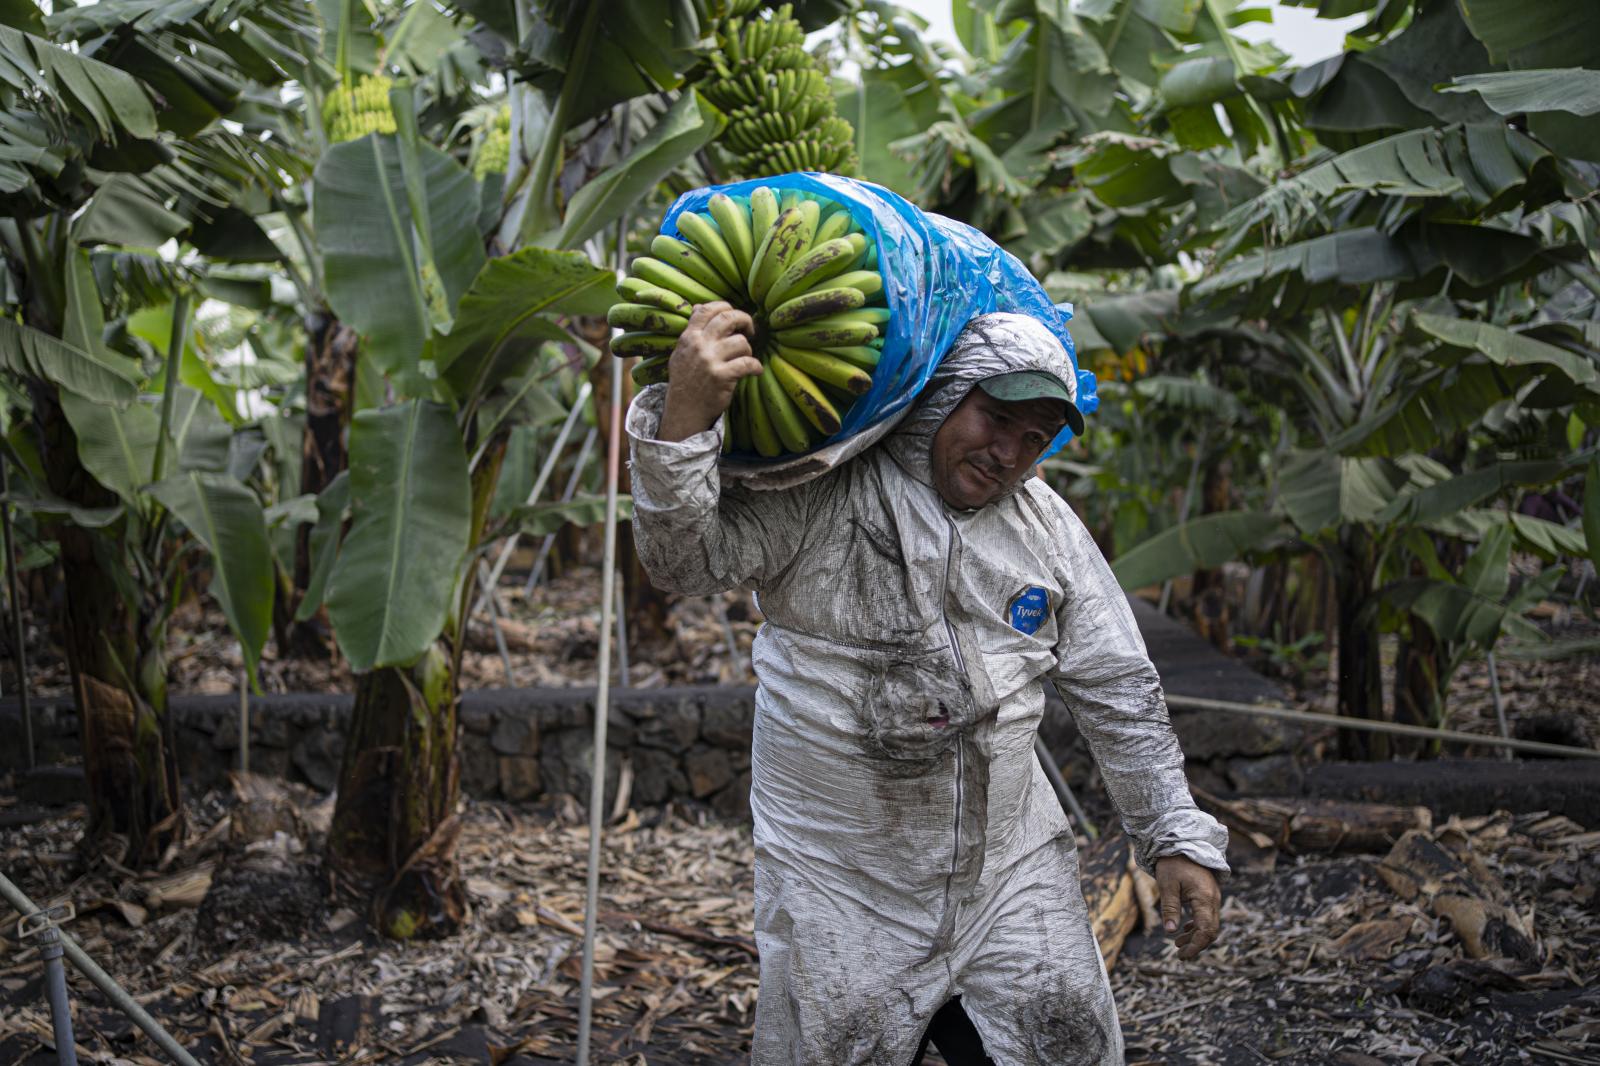 Image from Daily News - Omelio is gathering bananas in plantation plenty of ash....